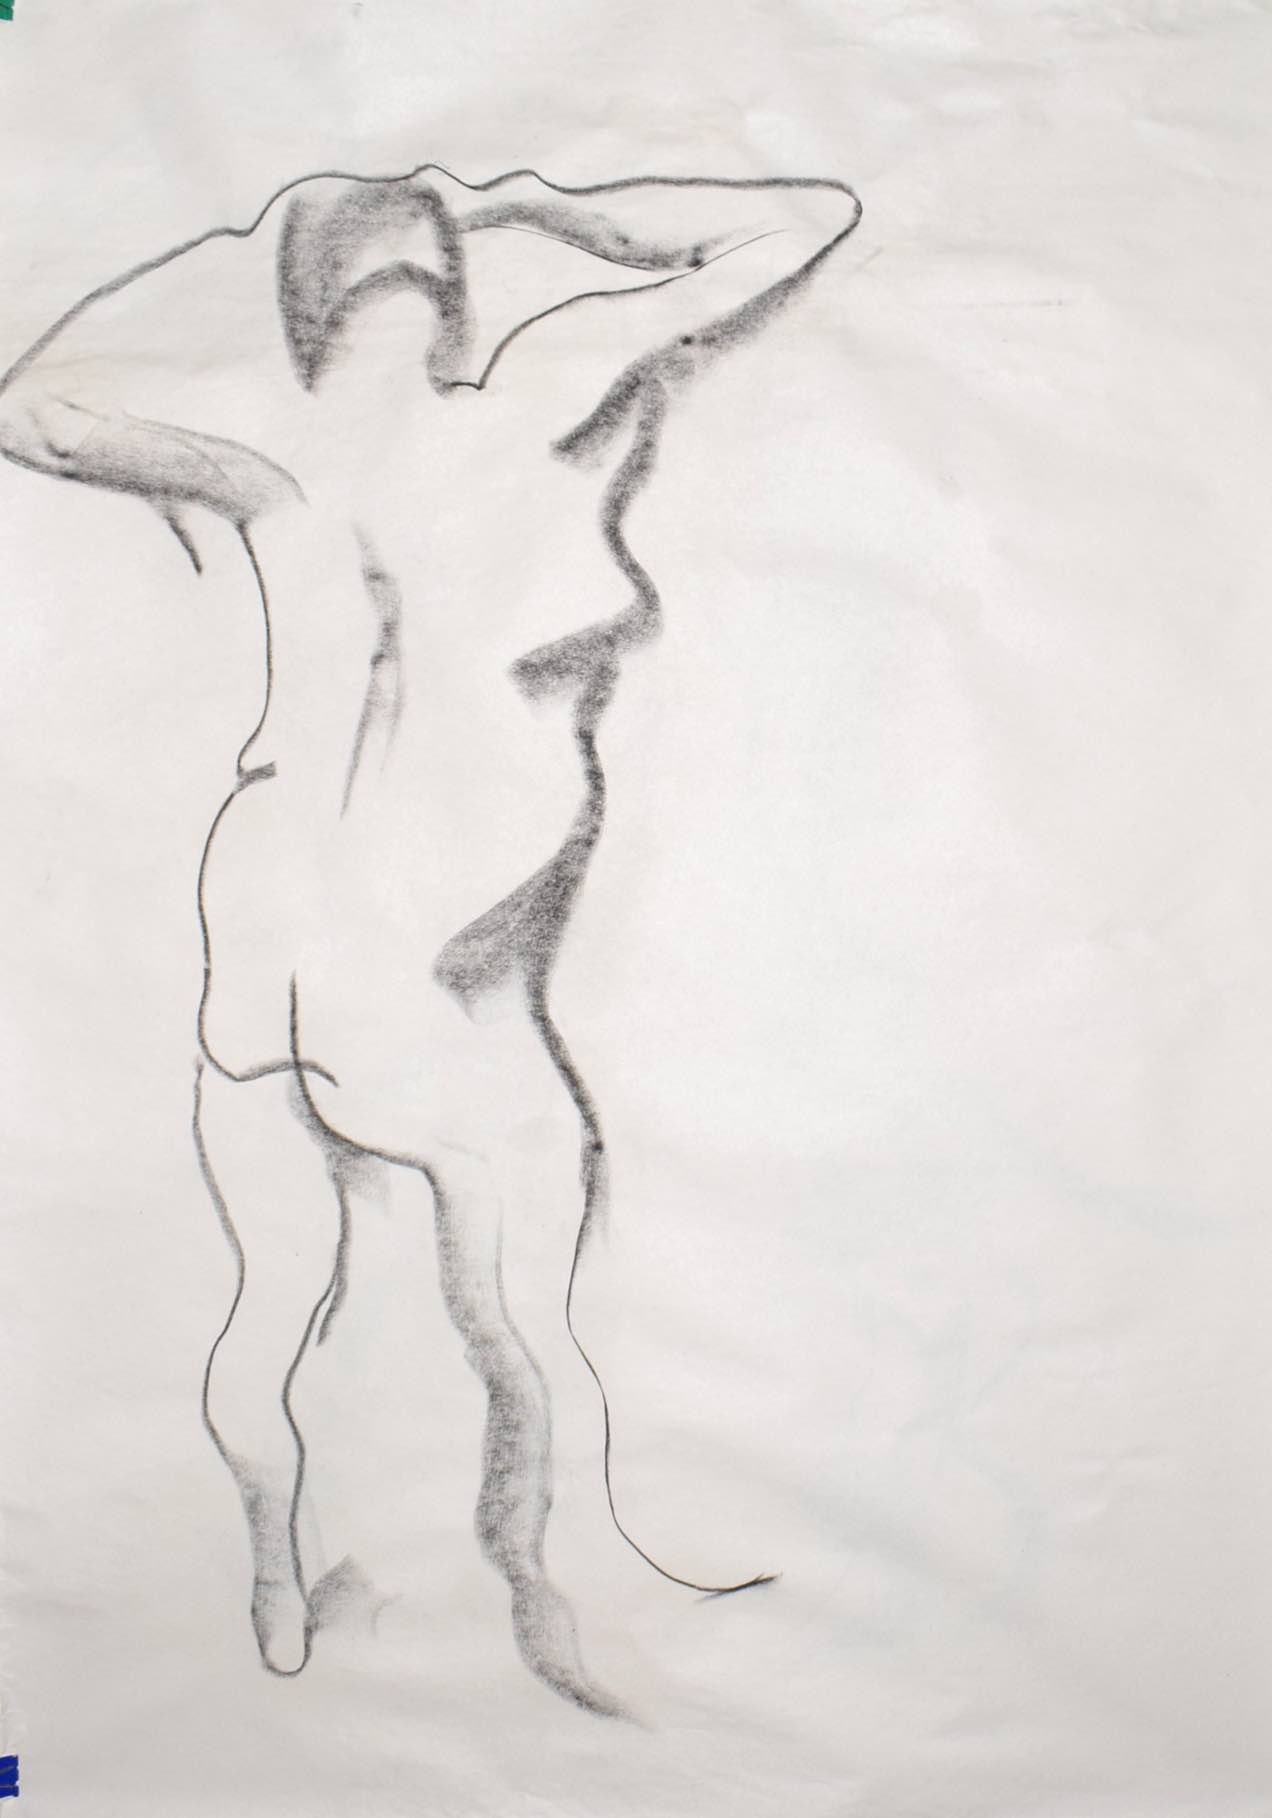 Drawing of nude human figure seen from behind